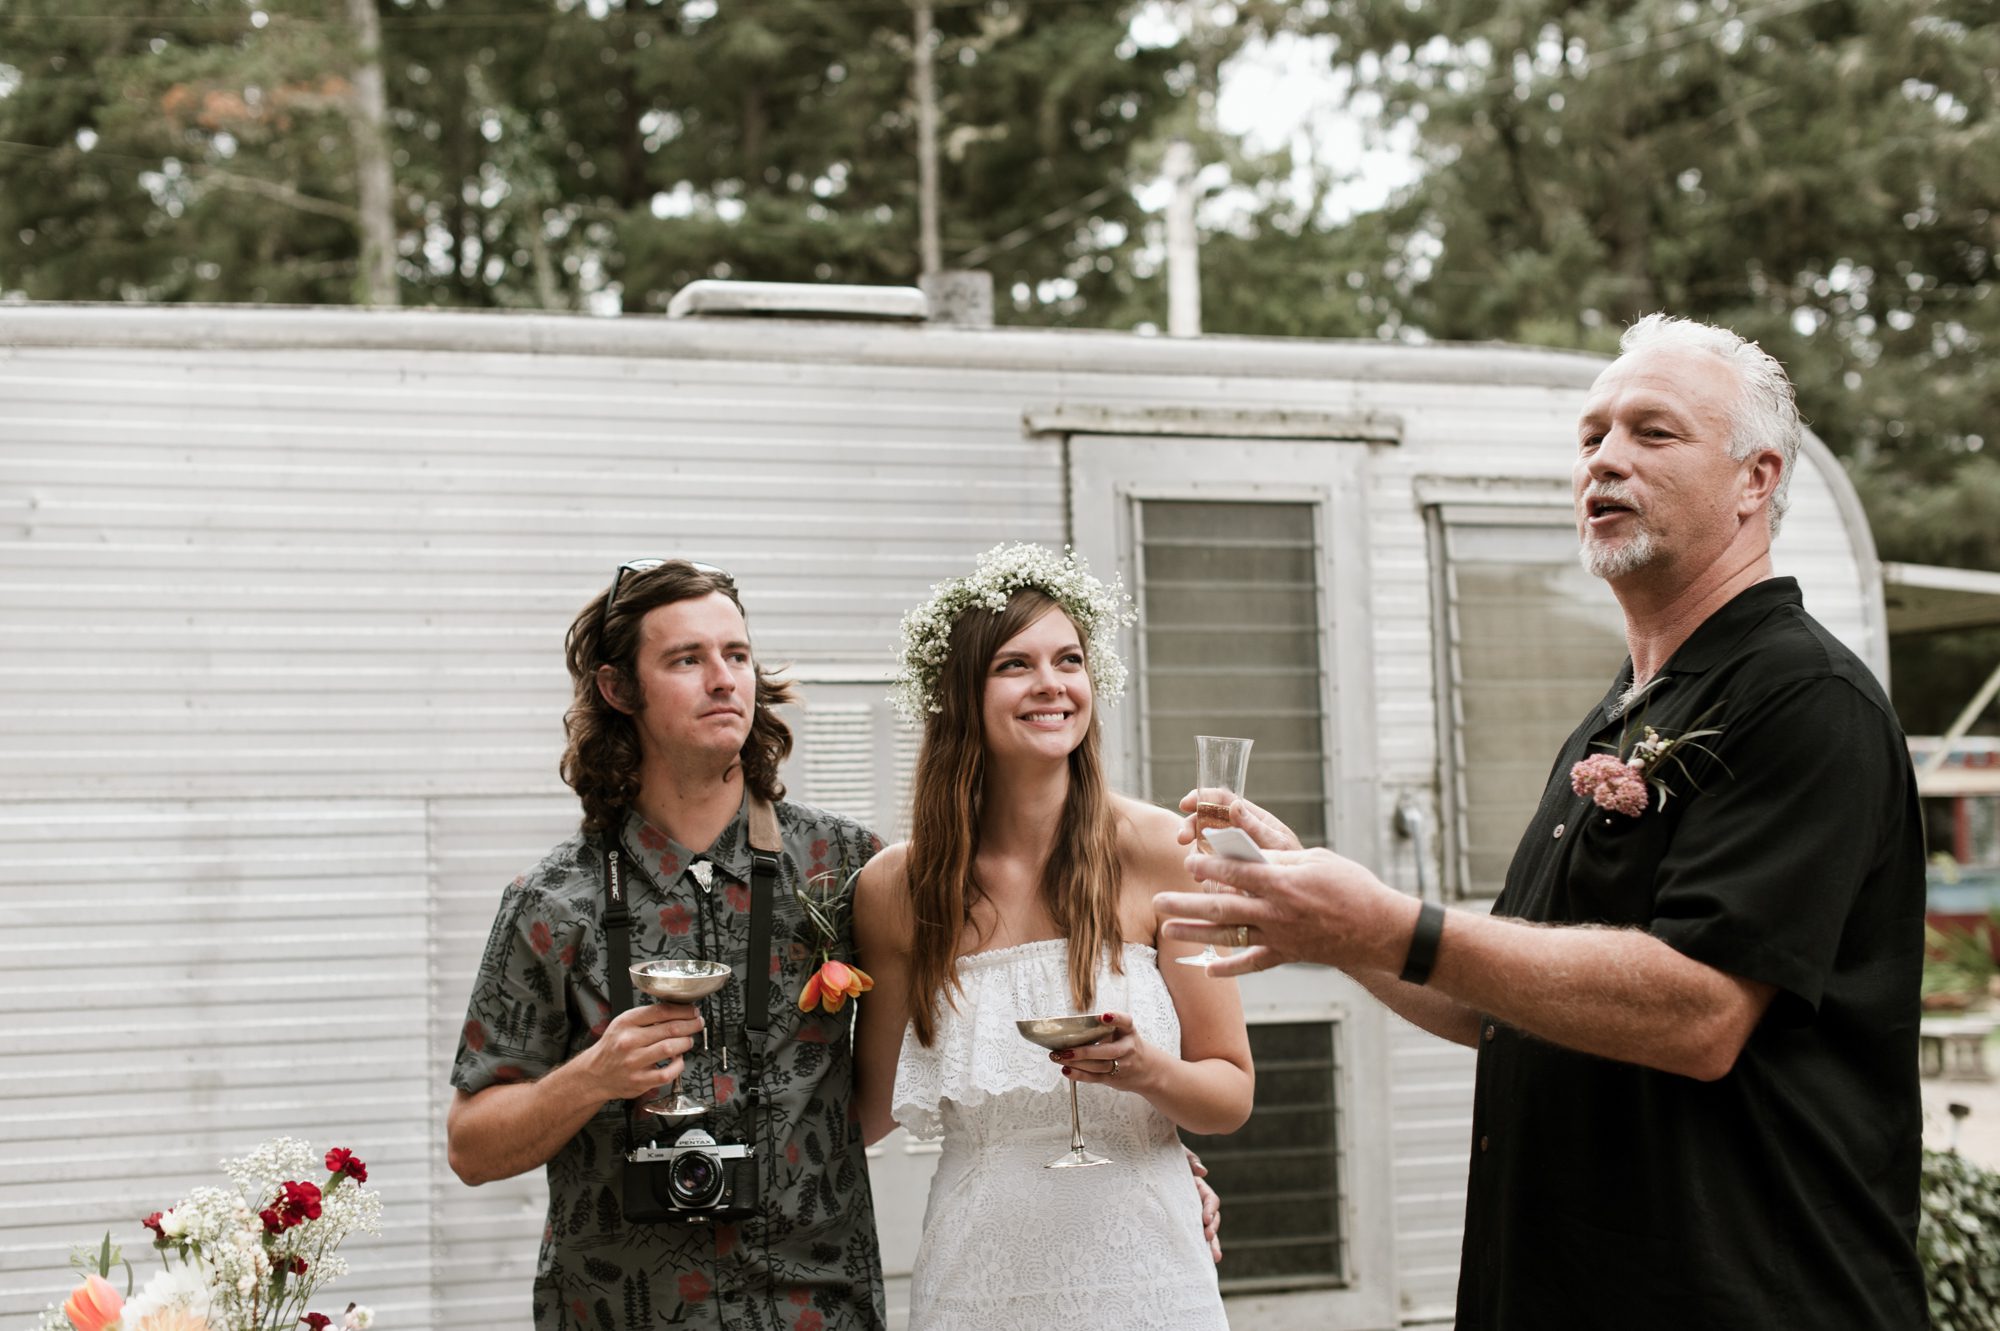 Father of the groom gives a wedding toast. By Sou'Wester wedding photographer Briana Morrison